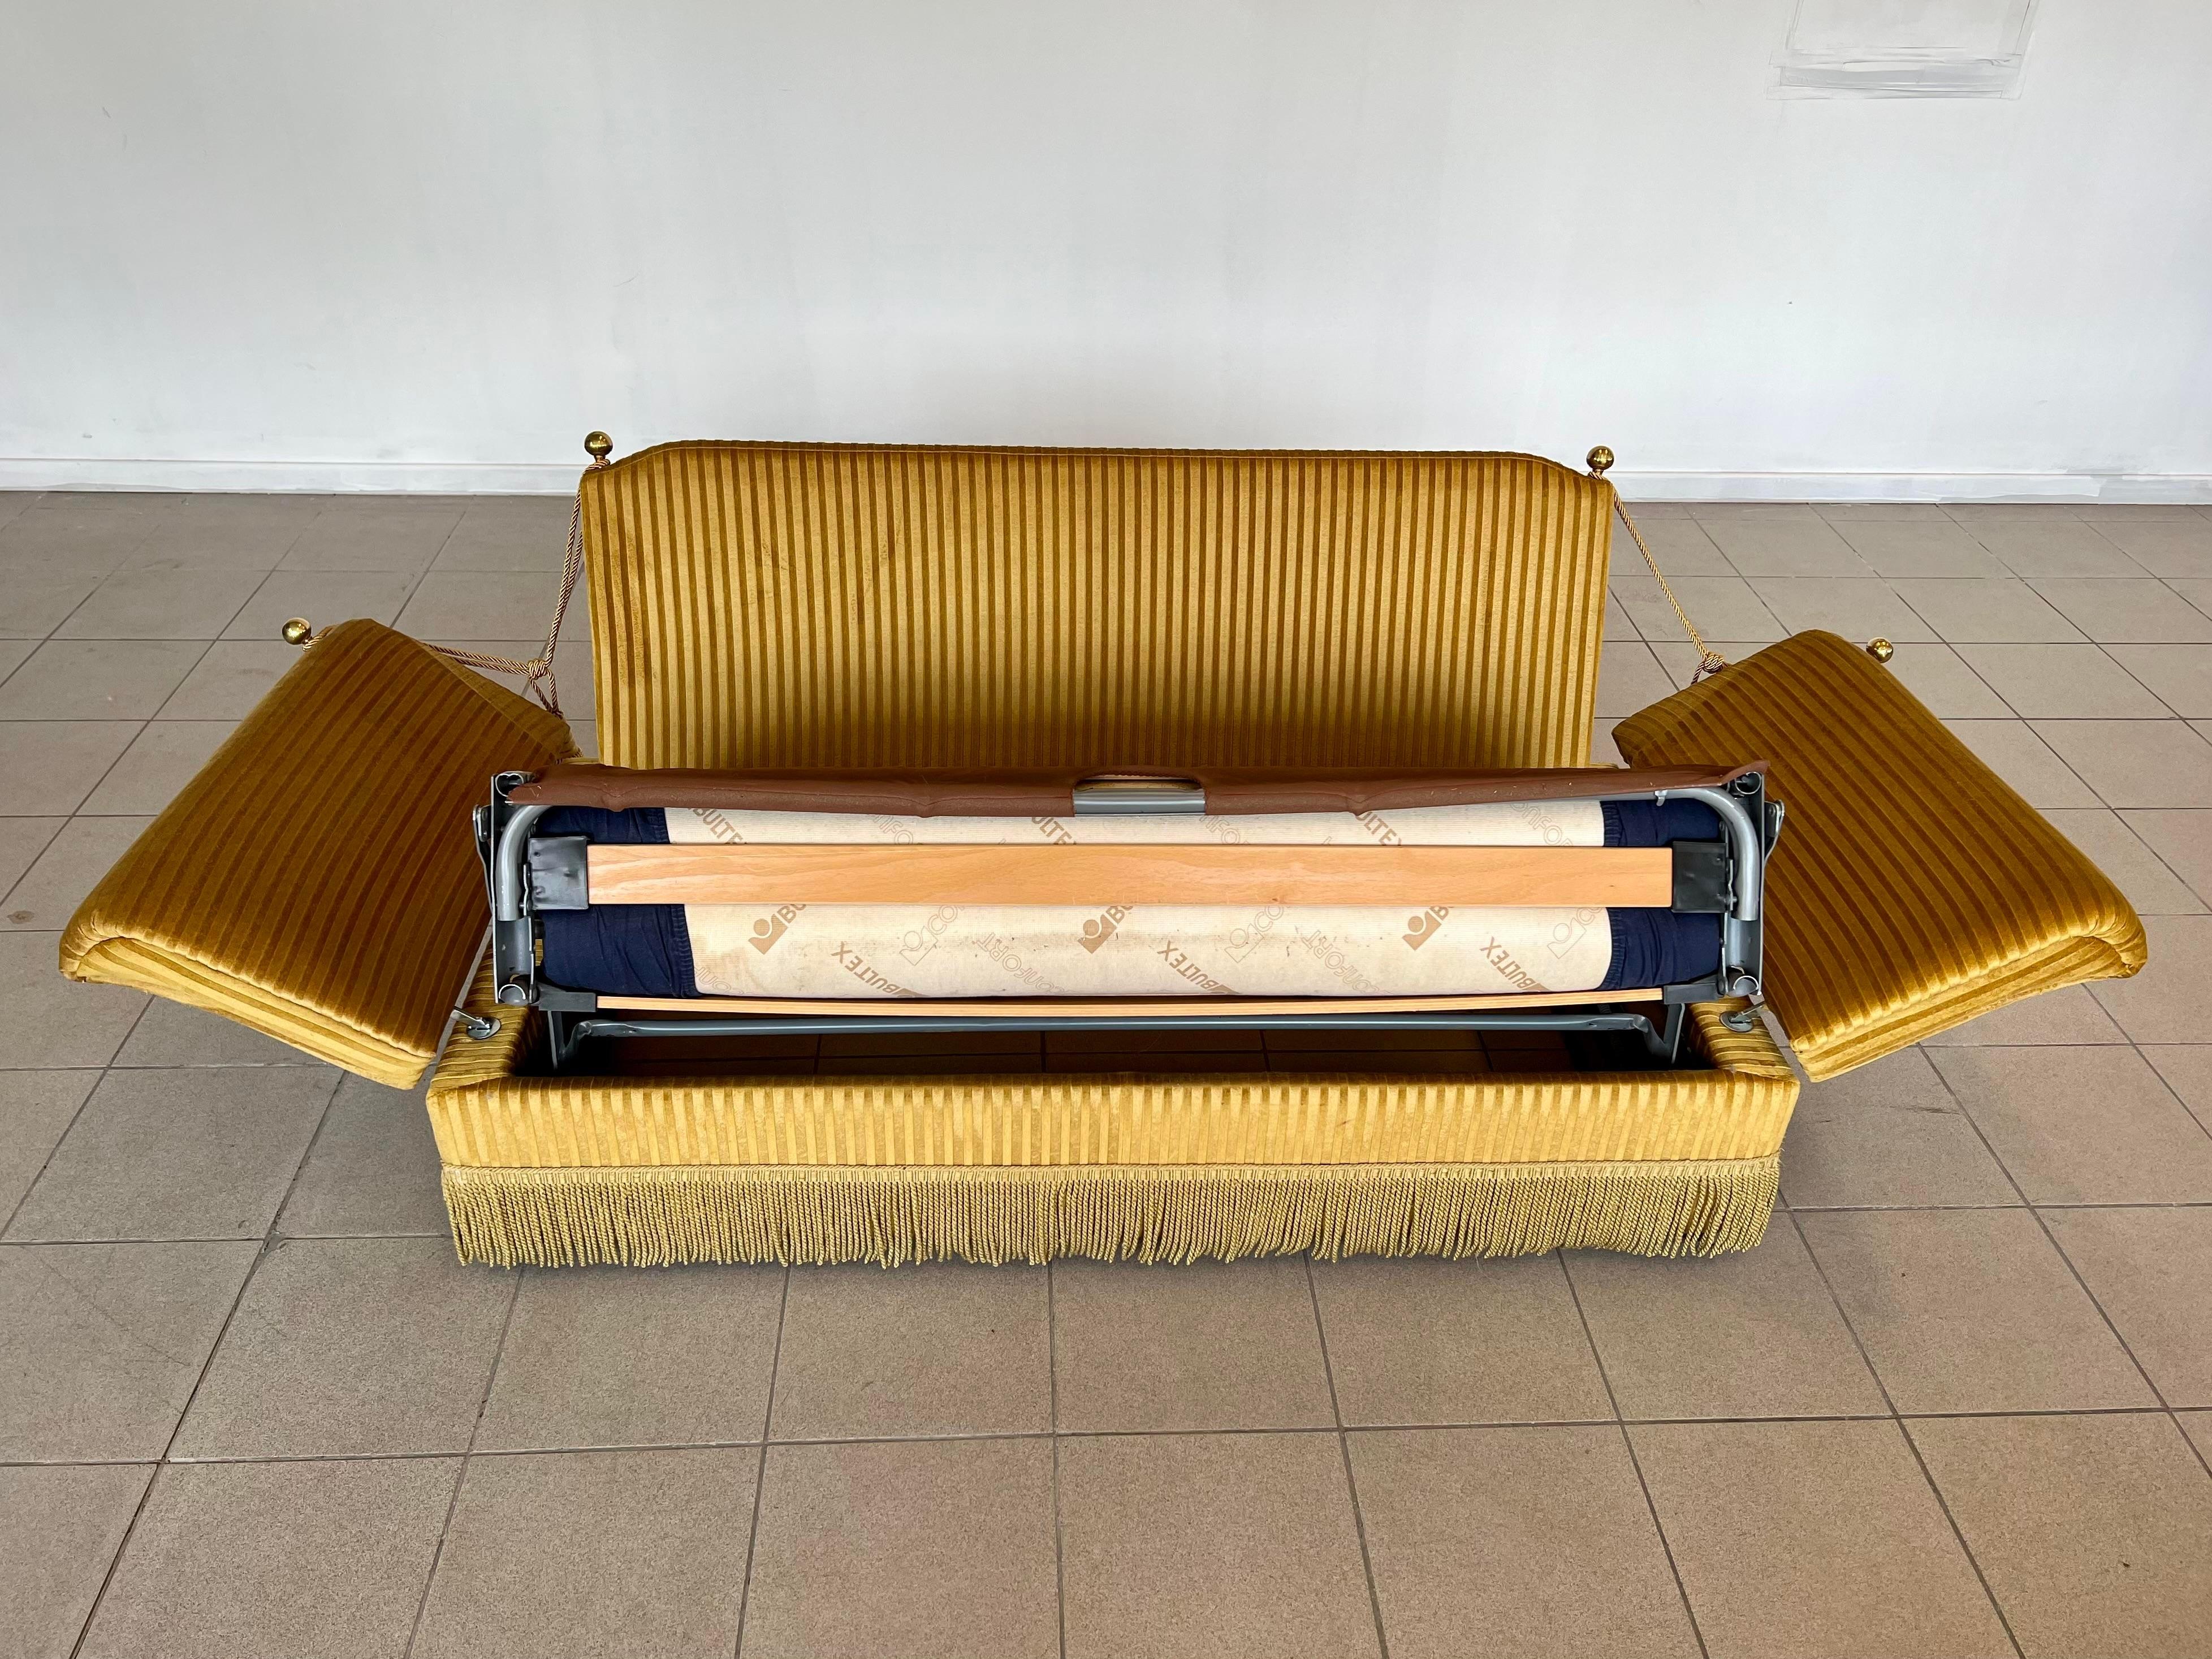 20th Century Vintage Art Deco Styled Adjustable Sofa Bed With Cushions and Fringes For Sale